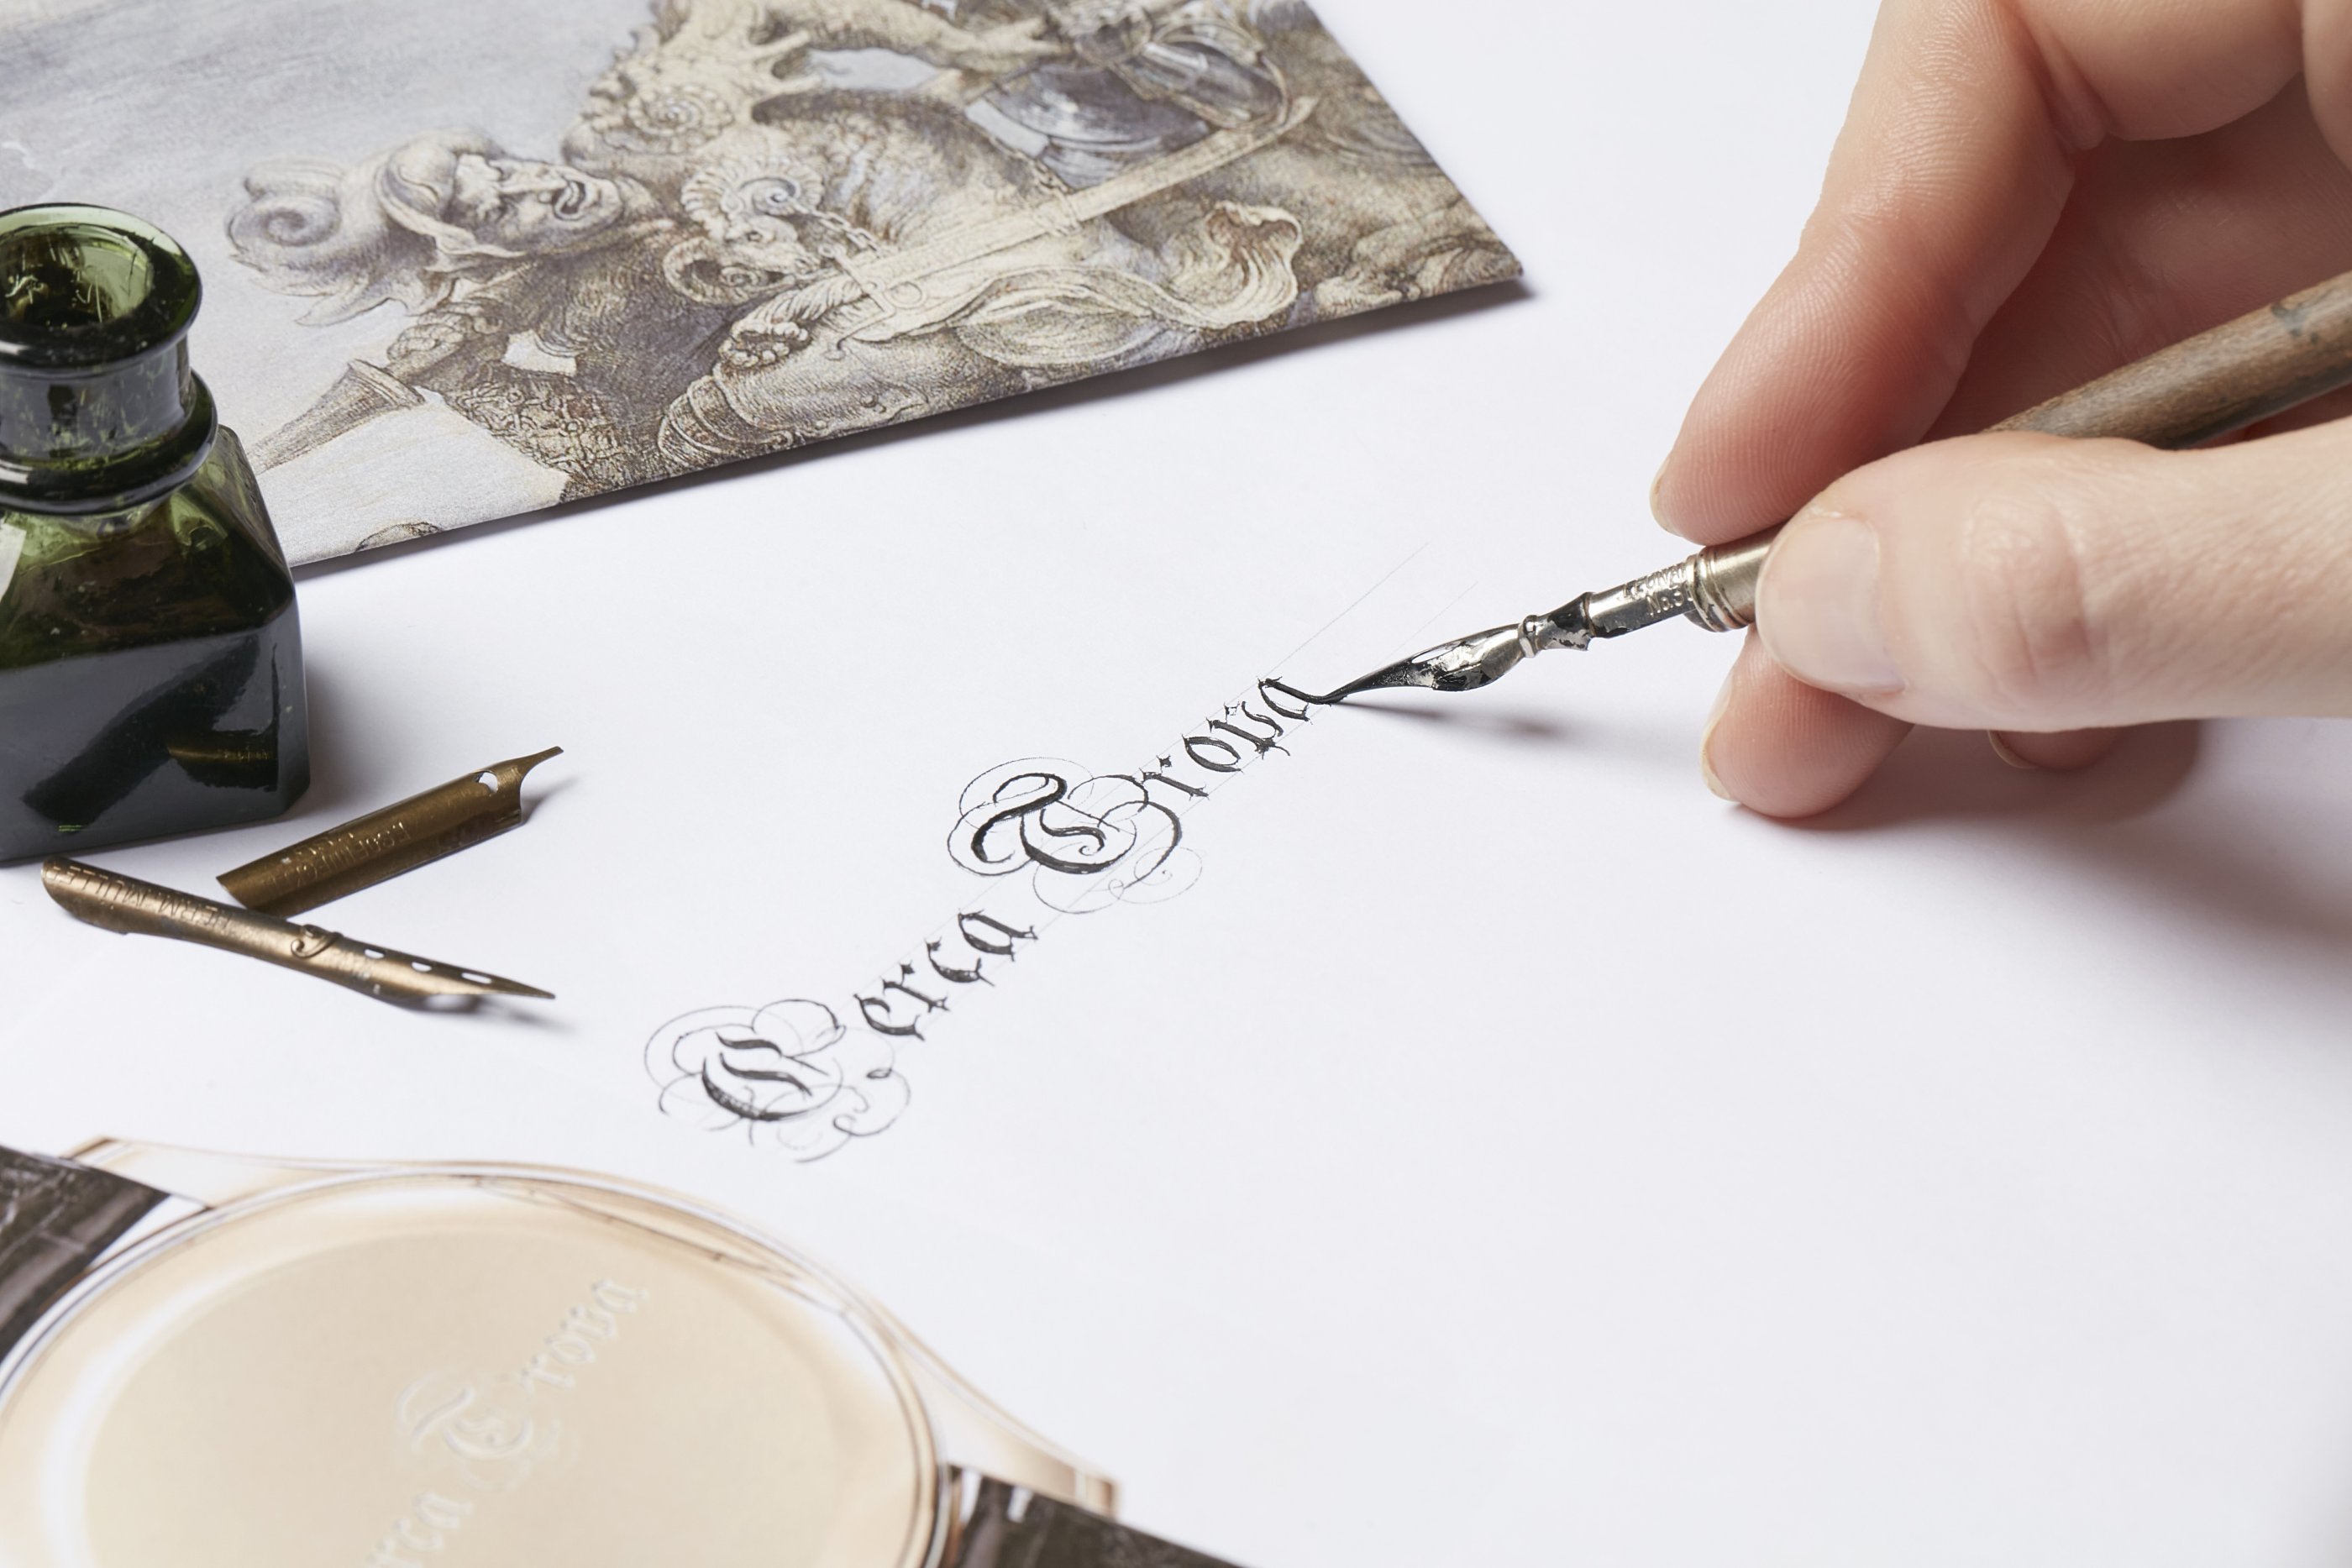 Vacheron Constantin offers a new experience with the Louvre Museum